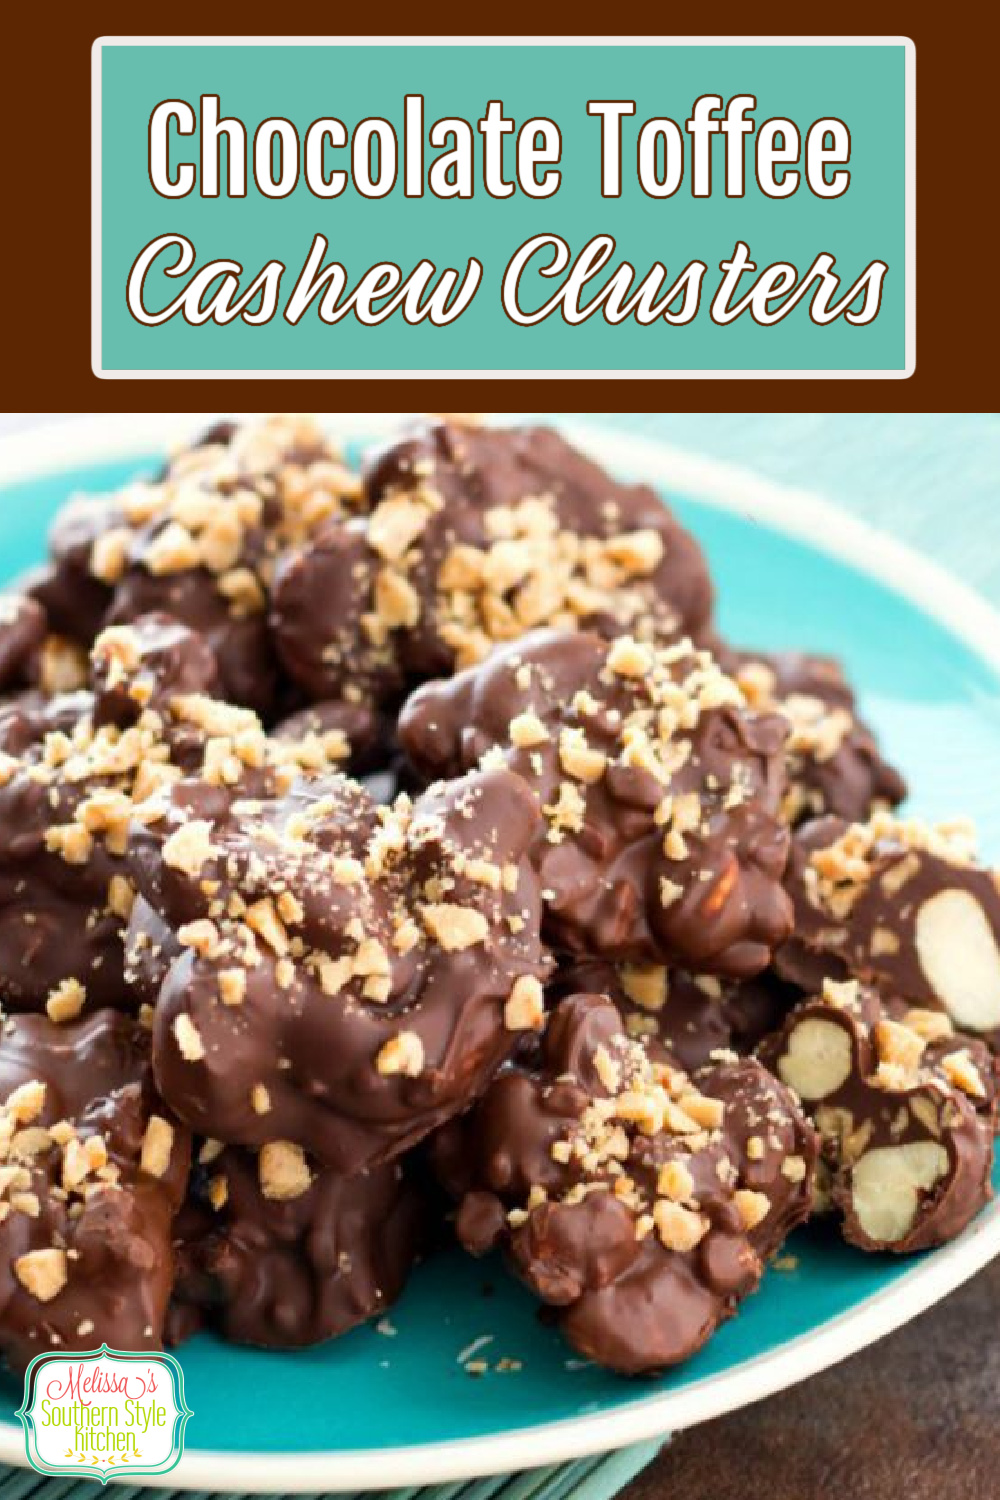 These insanely delicious Chocolate Toffee Cashew Clusters are addictive #chocolatecashewclusters #chocolatecandy #cashewclusters #toffee #chocolatetoffee #easyrecipes #candy ##christmascandy #chocolate #cashews #holidayrecipes #southernrecipes #southernfood via @melissasssk